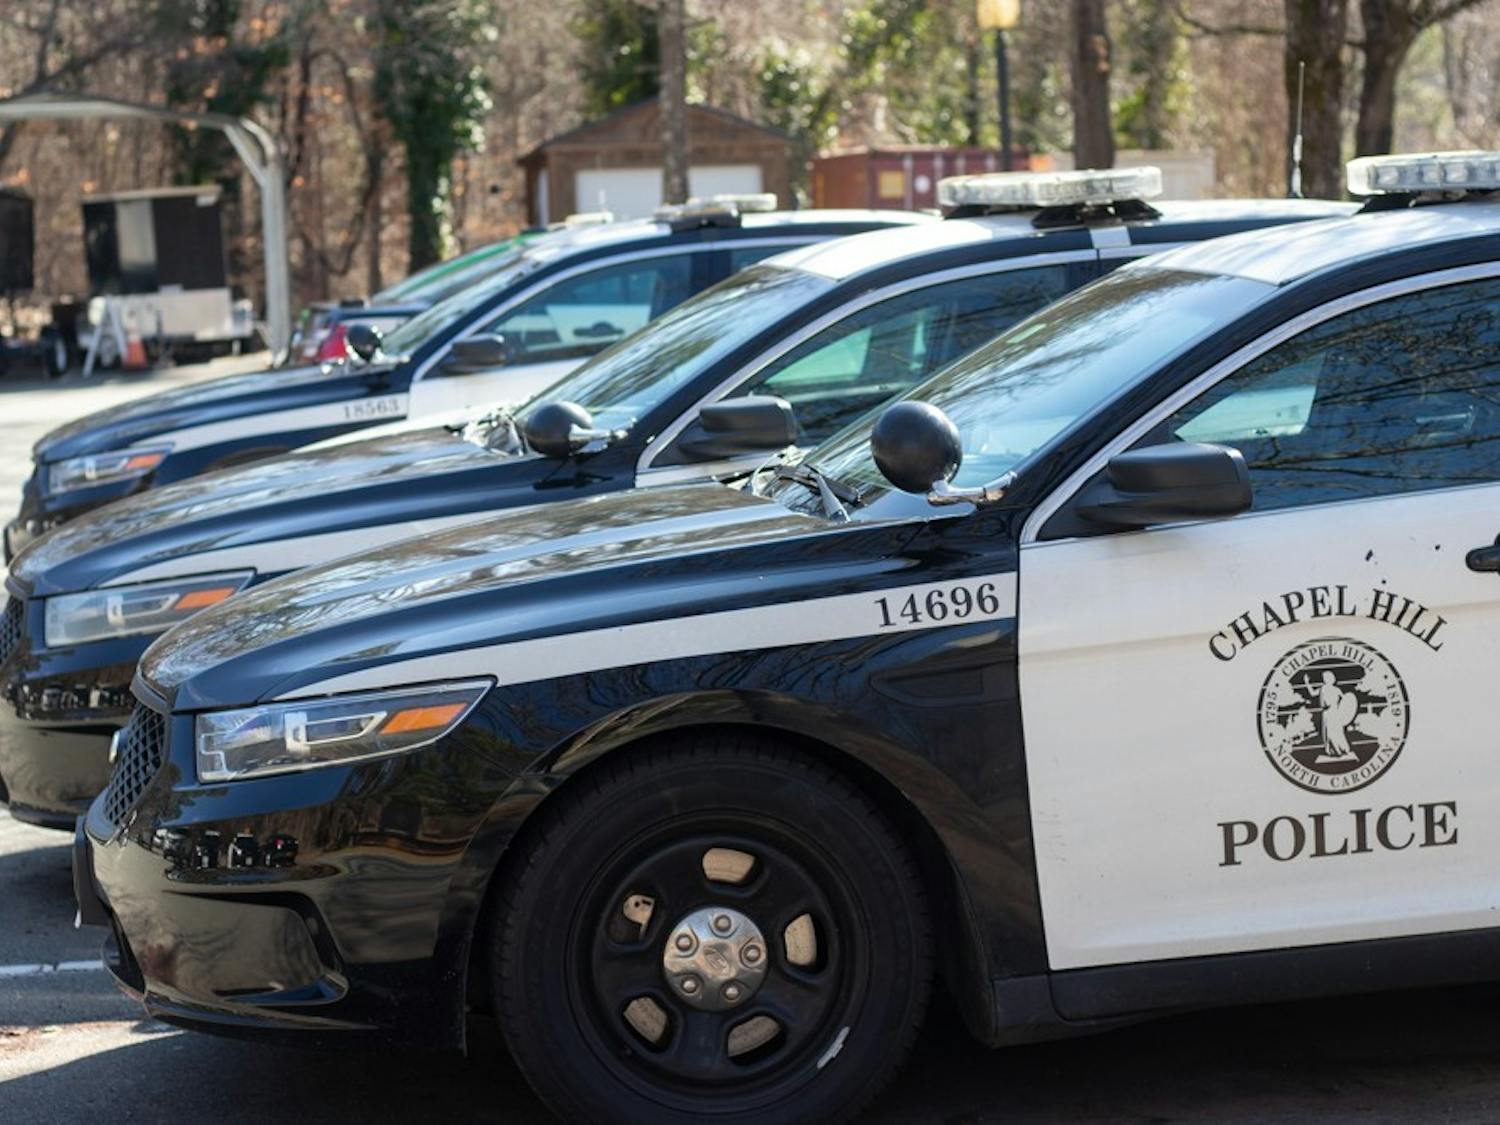 Chapel Hill Police vehicles standby at the Chapel Hill Police Department on Tuesday, Jan. 28, 2020. The Chapel Hill Police Department has increased their patrols in and around UNC's campus in response to the sexual assault in the Shortbread Lofts parking deck on Sept. 13, 2019.&nbsp;